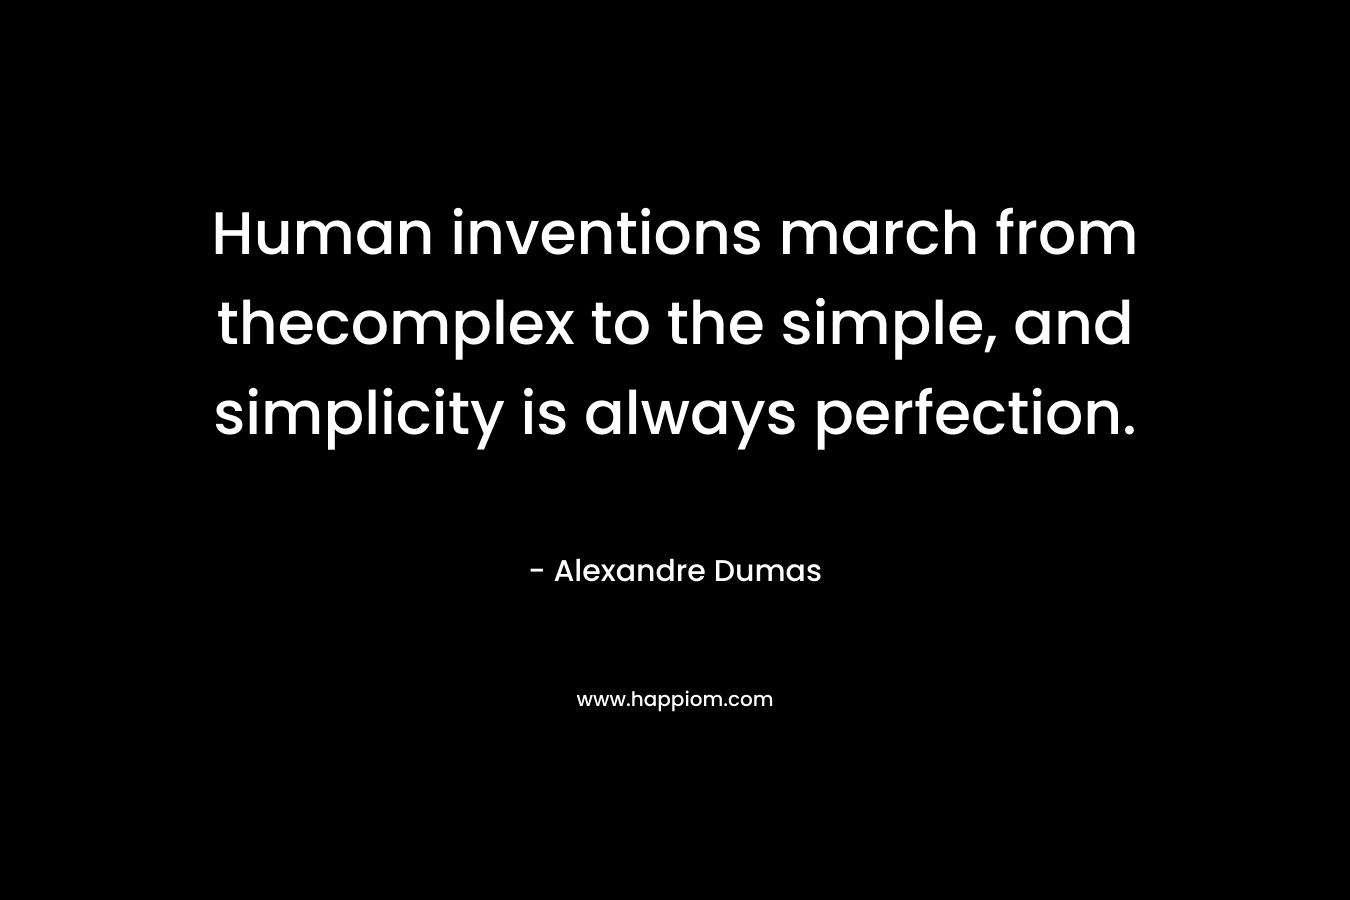 Human inventions march from thecomplex to the simple, and simplicity is always perfection.